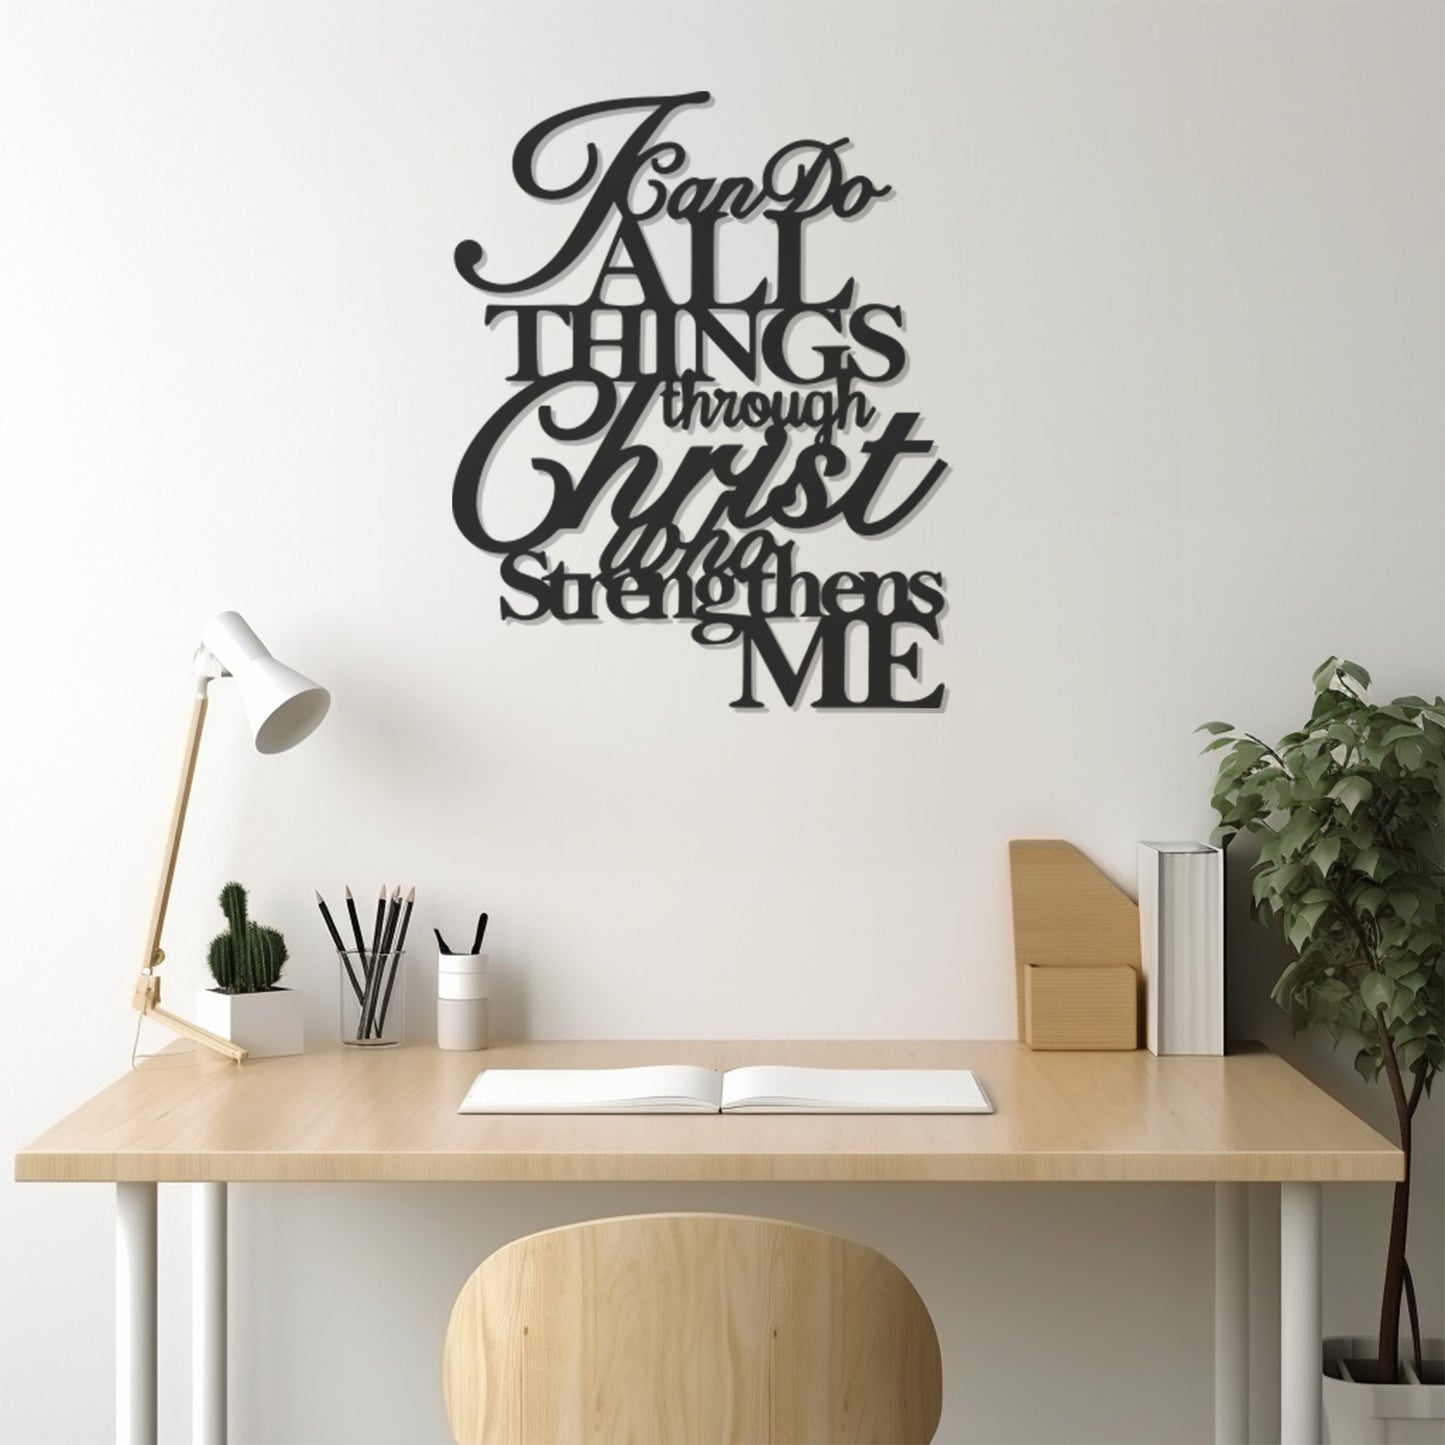 Metal Wall Decor With The Inscription I Can Do Anything Thanks To Jesus Who Strengthens Me